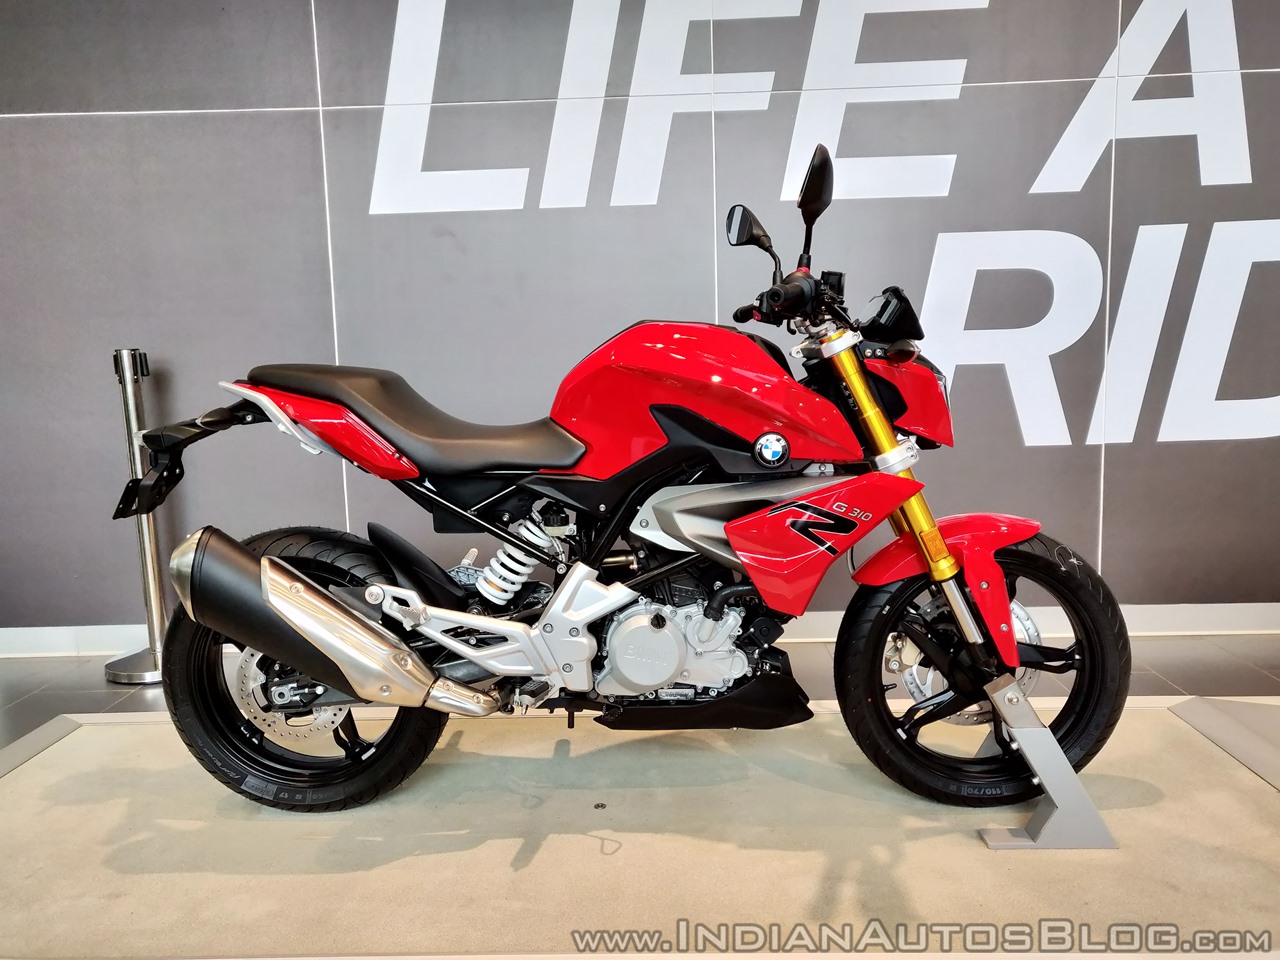 Bmw G 310 R Amp G 310 Gs Get Discounts Amp Benefits Up To Inr 70 000